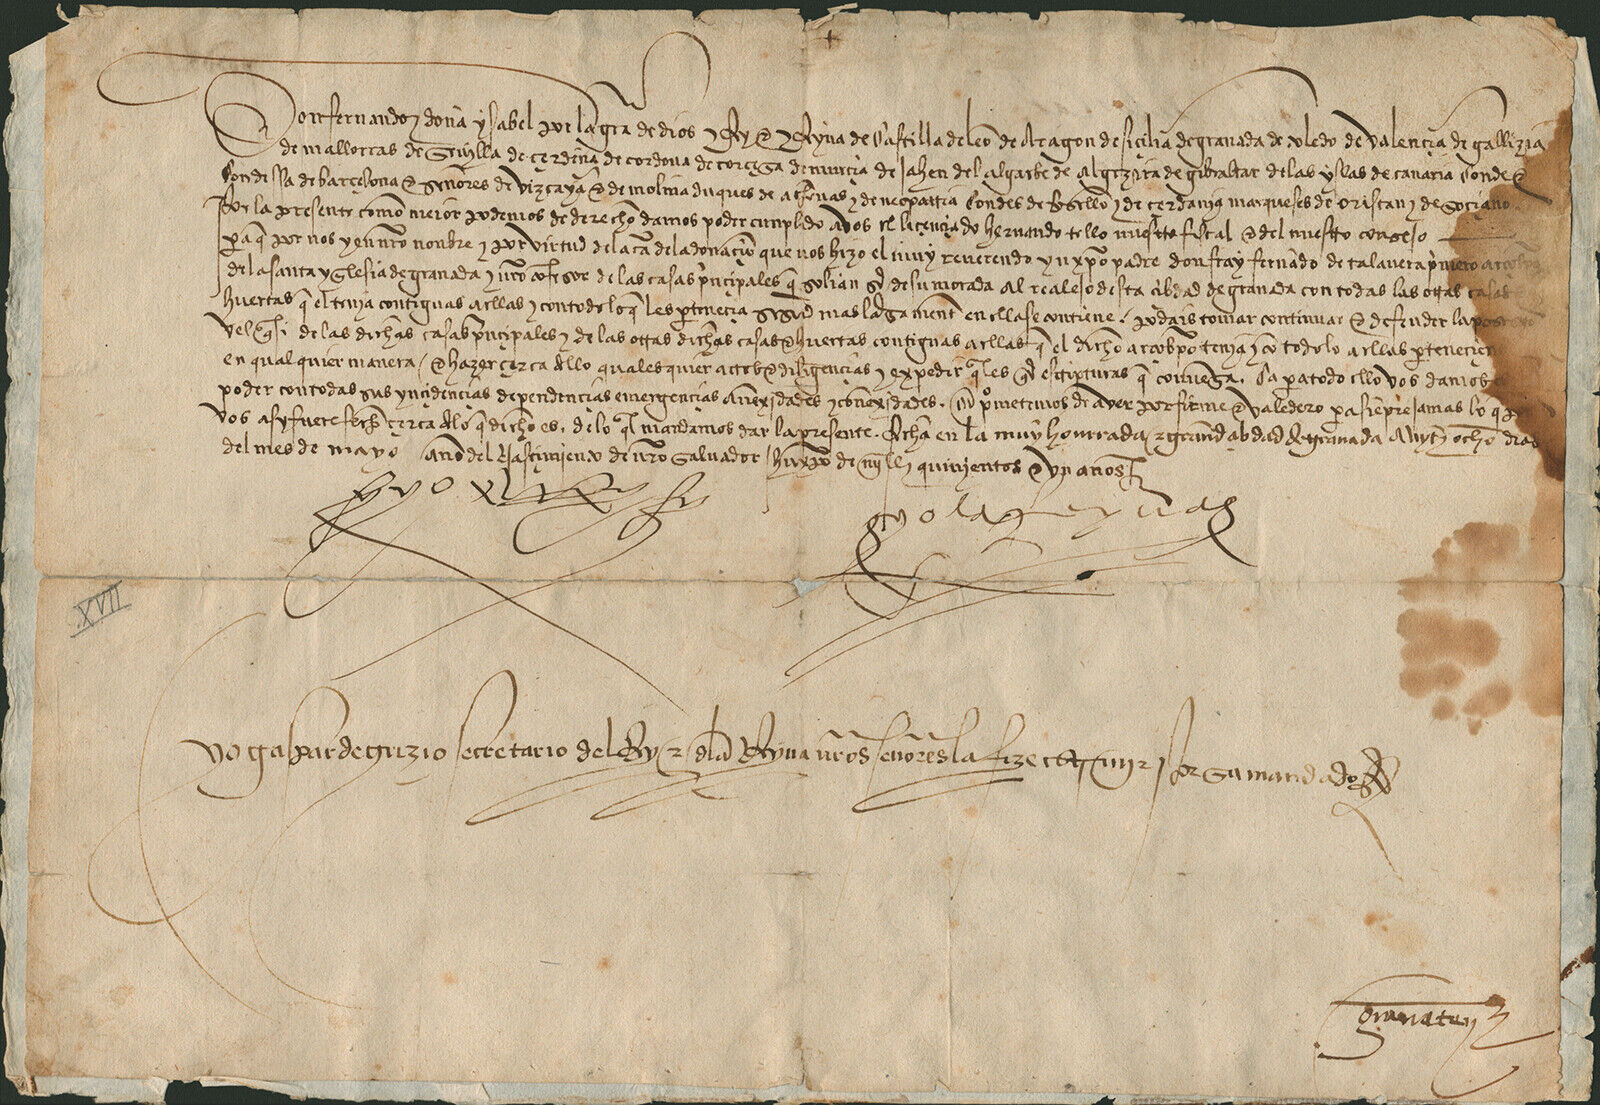 KING FERDINAND V (SPAIN) - MANUSCRIPT DOCUMENT SIGNED 5/28/1501 WITH CO-SIGNERS